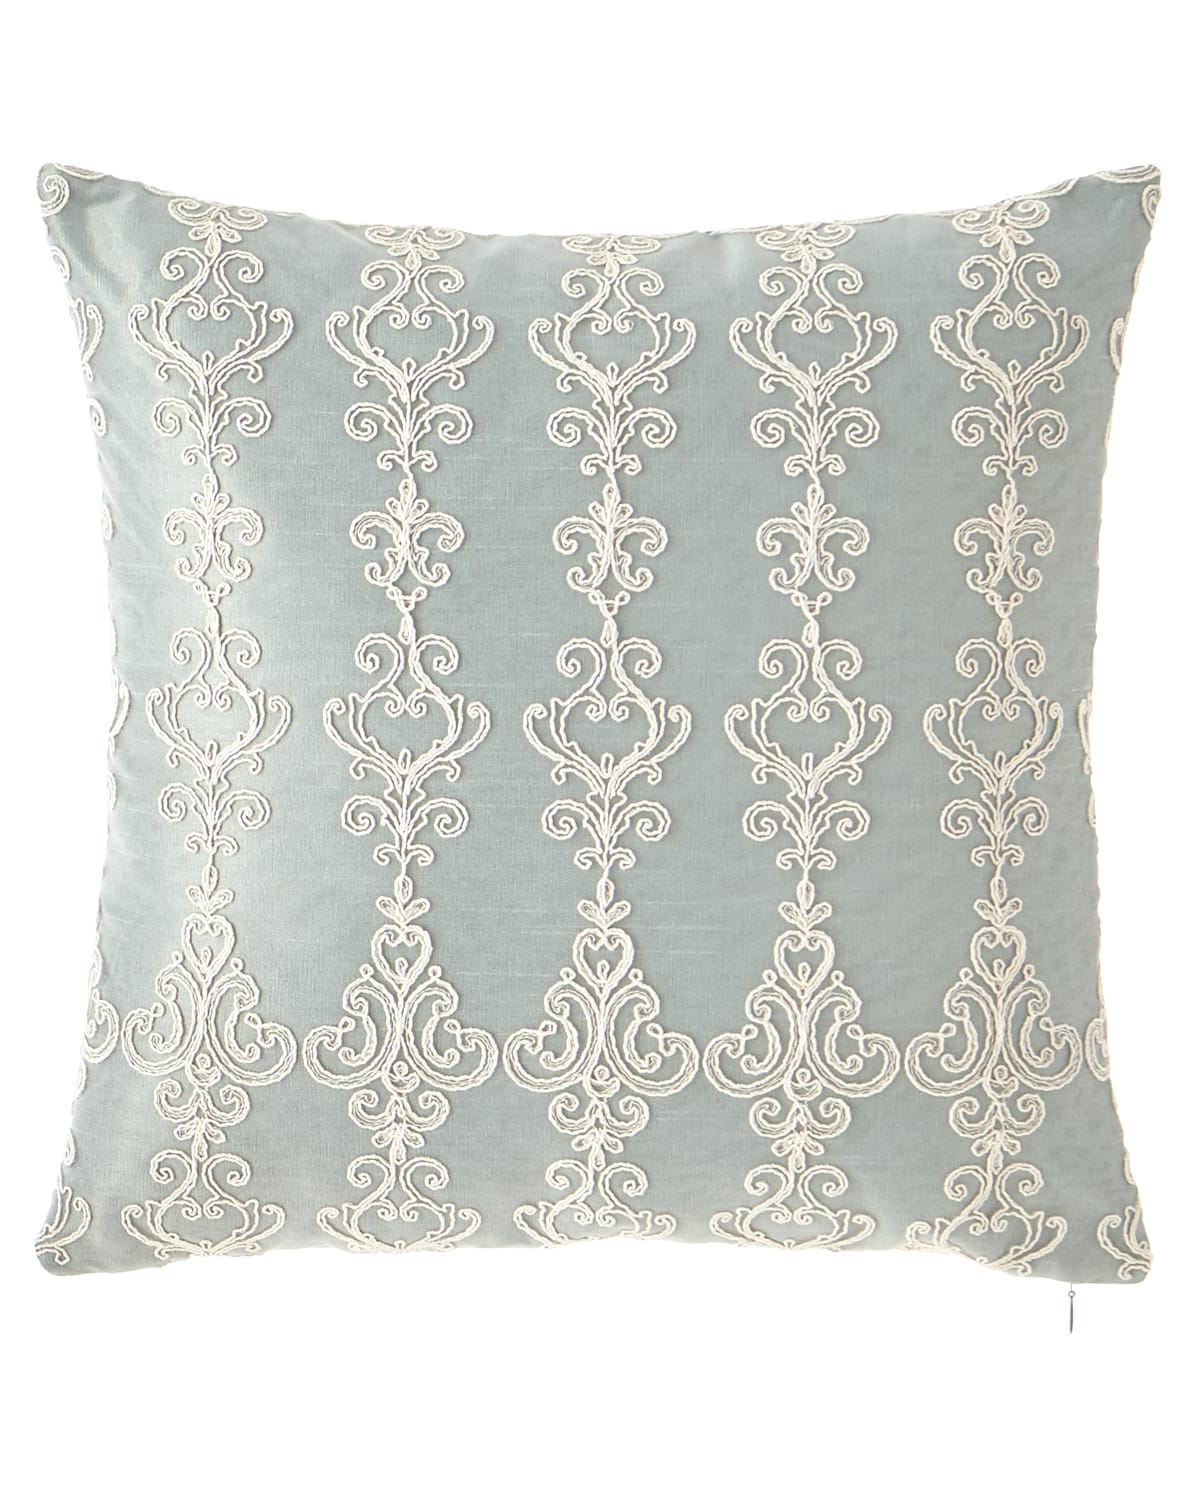 Image Sweet Dreams Gianna Lace Square Pillow